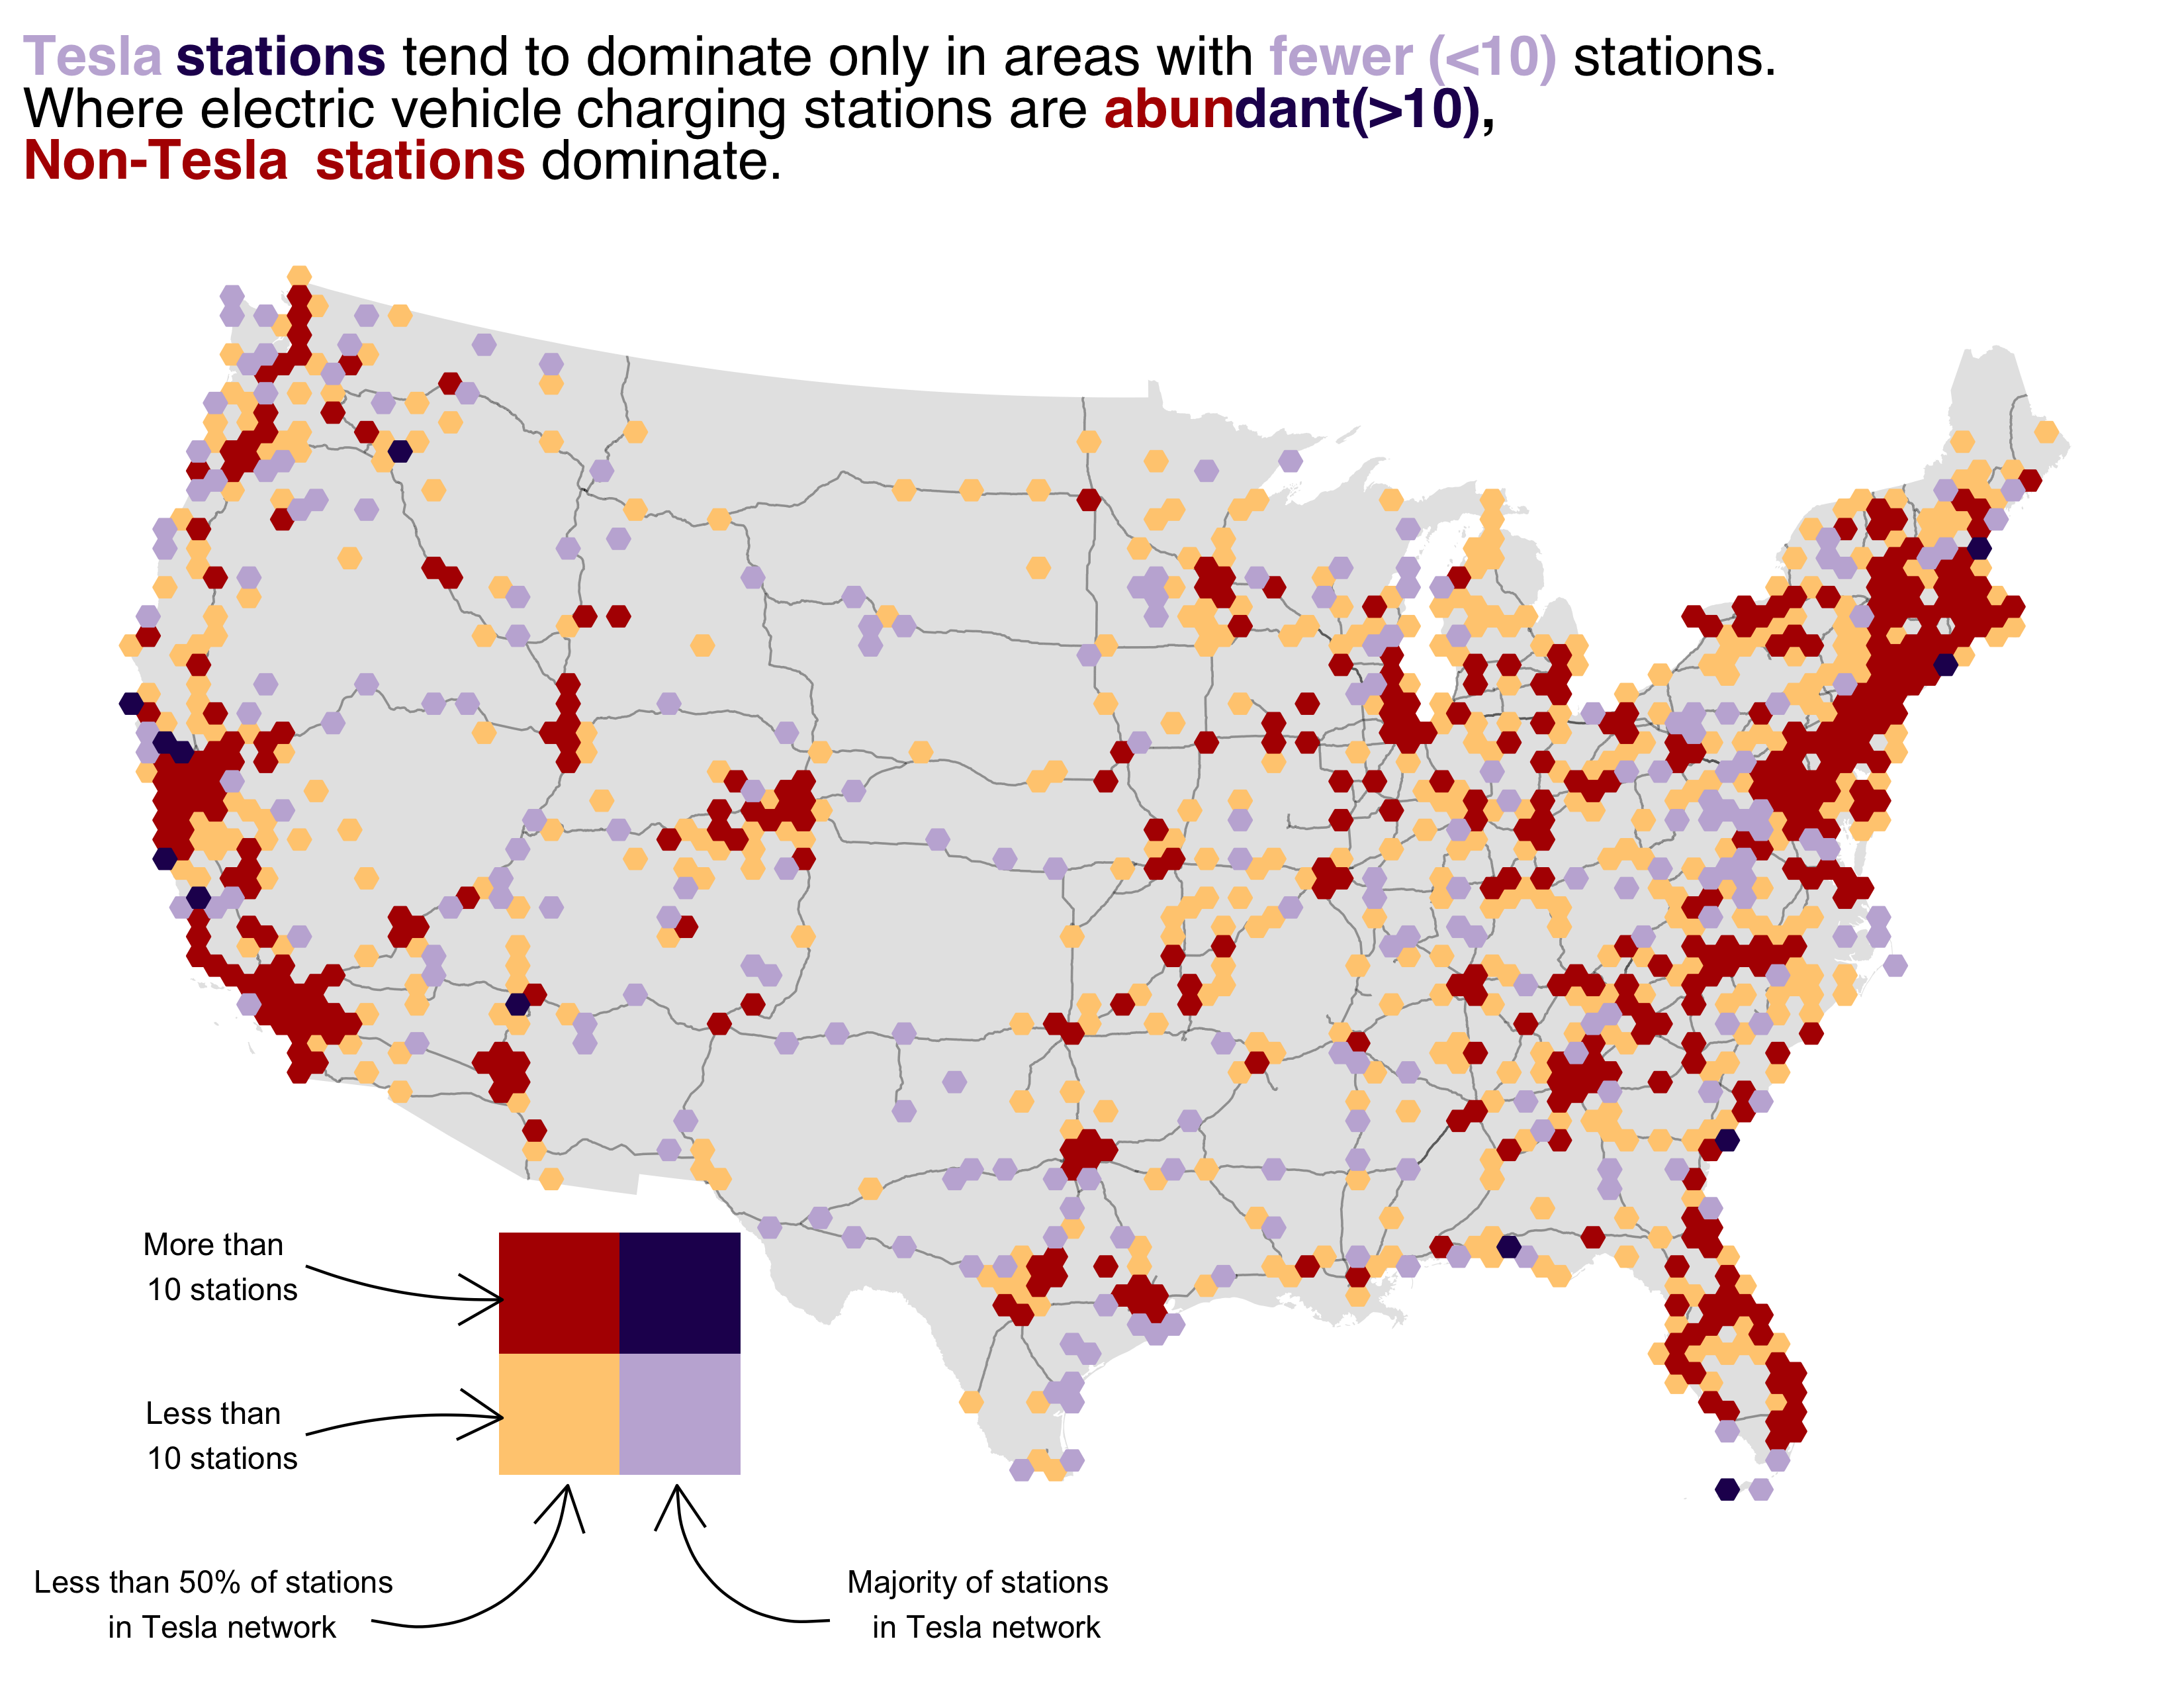 Bi-variate chloropleth map of electric vehicle charging station density in the continental US, where stations in the Tesla network only dominate in areas with fewer than 10 stations, and areas where charging stations are more abundant are dominated by stations outside of the Tesla network.